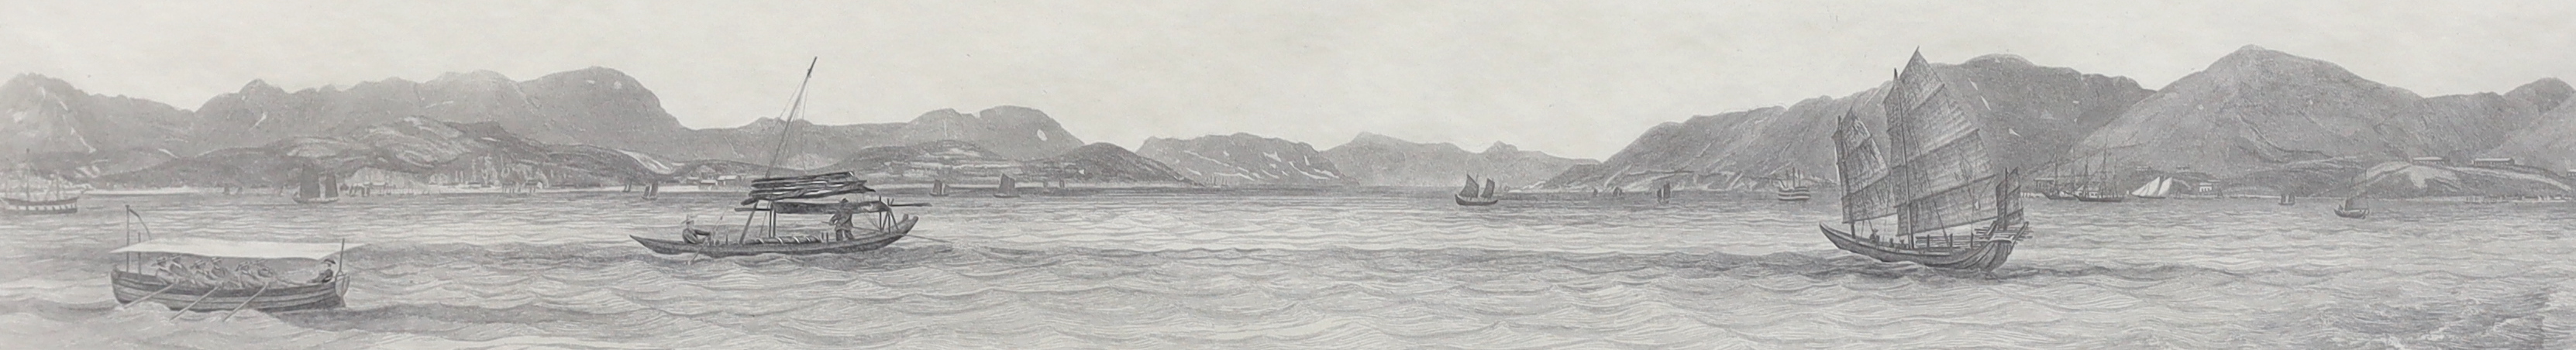 Lieutenant Leopold G. Heath for the Hydrographic Office, Hong Kong as seen from the anchorage of HMS Iris, 1846, set of three steel engravings, visible sheet 22 x 79cm